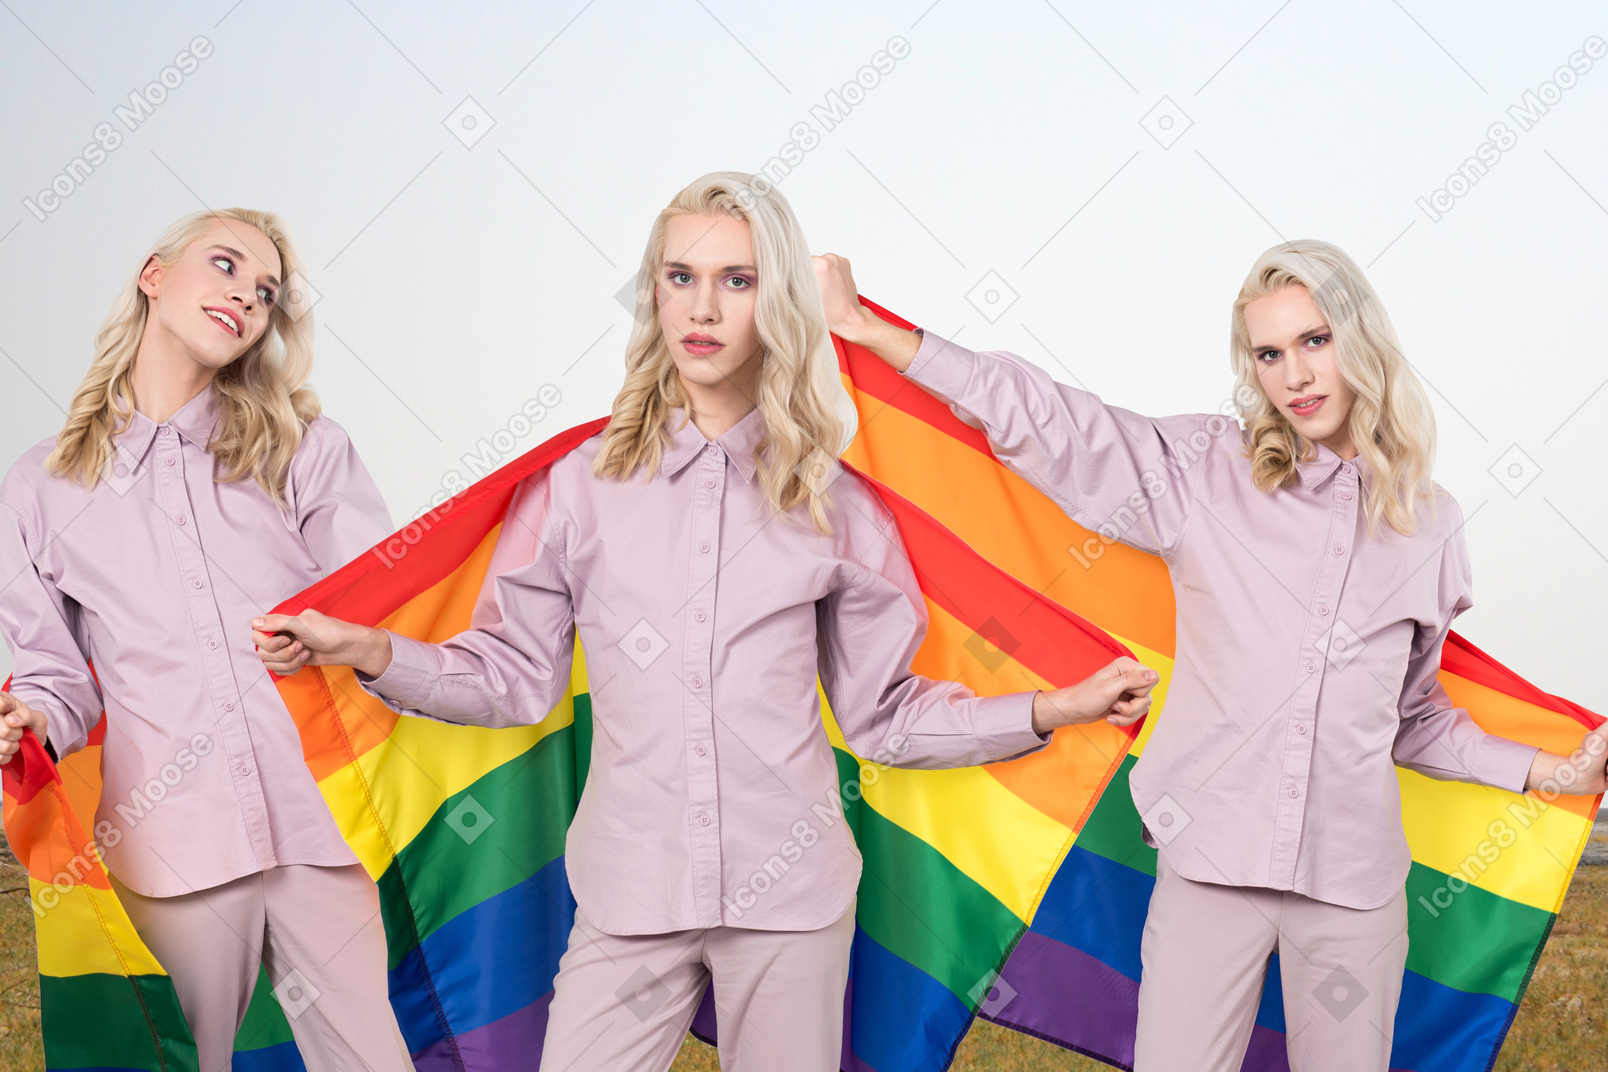 Non binary person standing with lgbtq flag